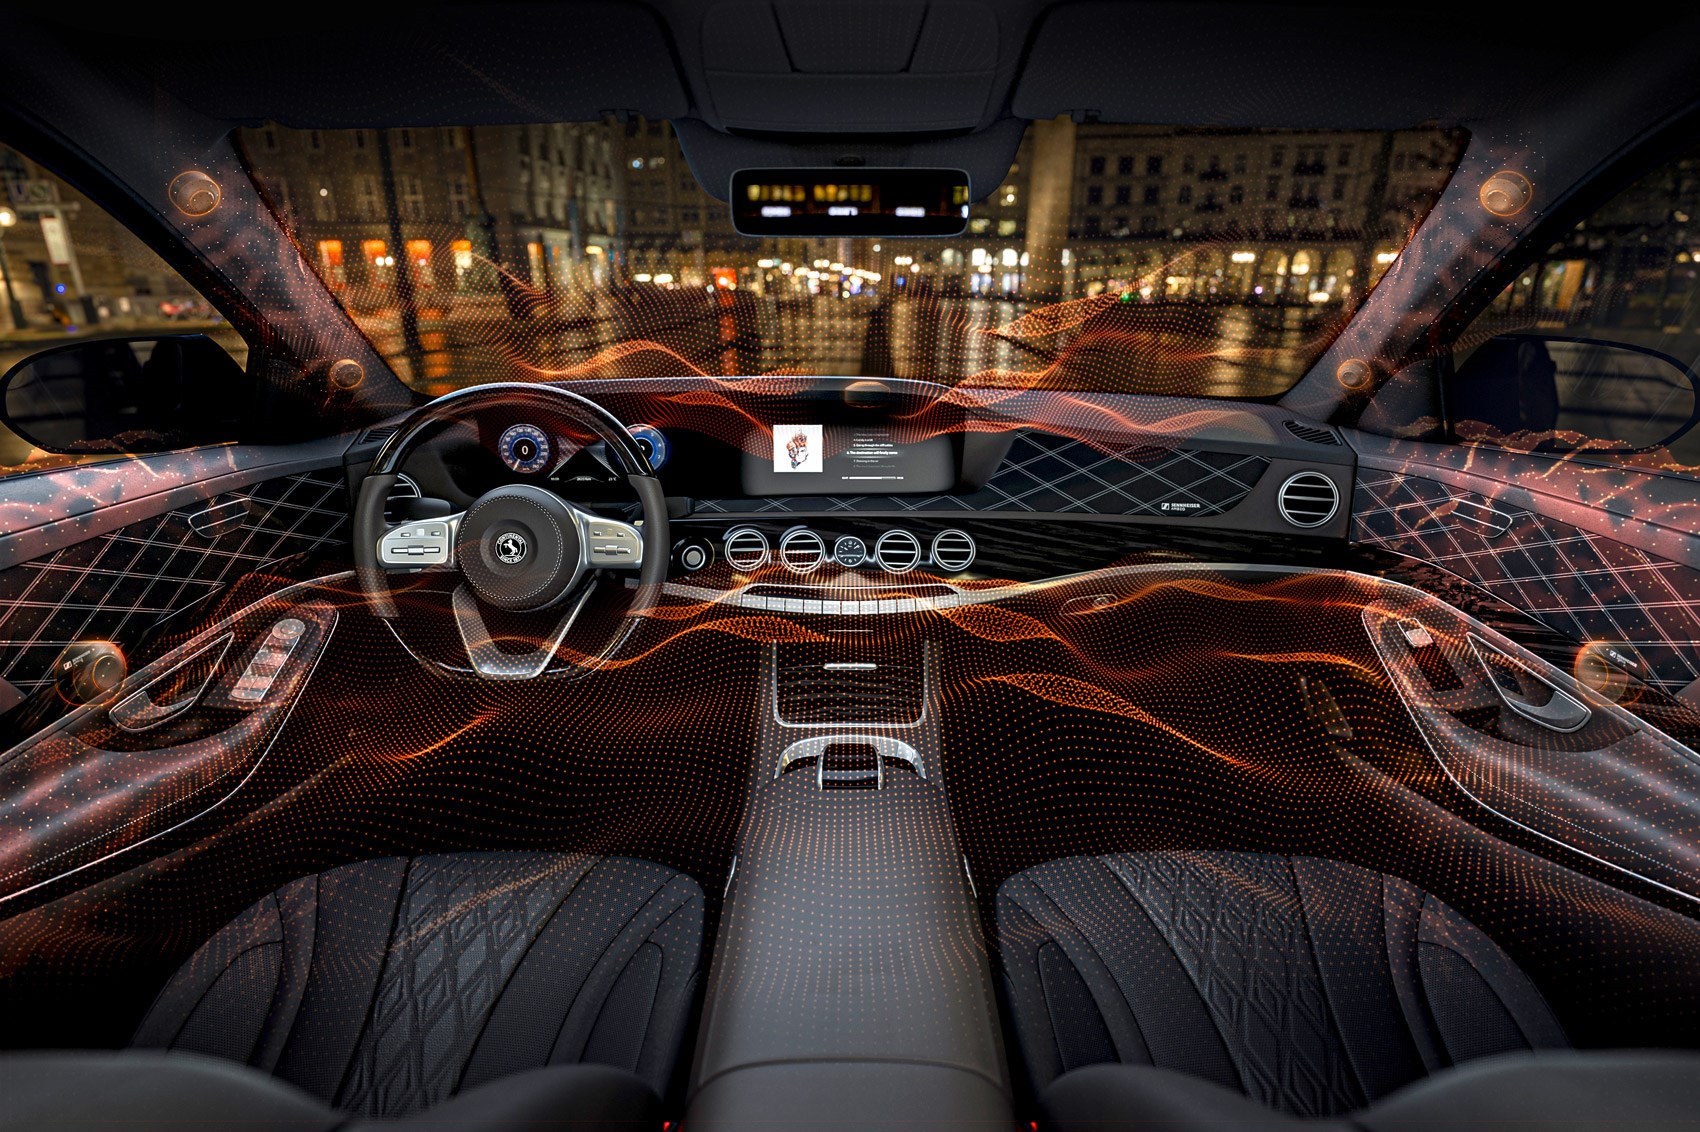 Active and speakerless: the future of in-car audio